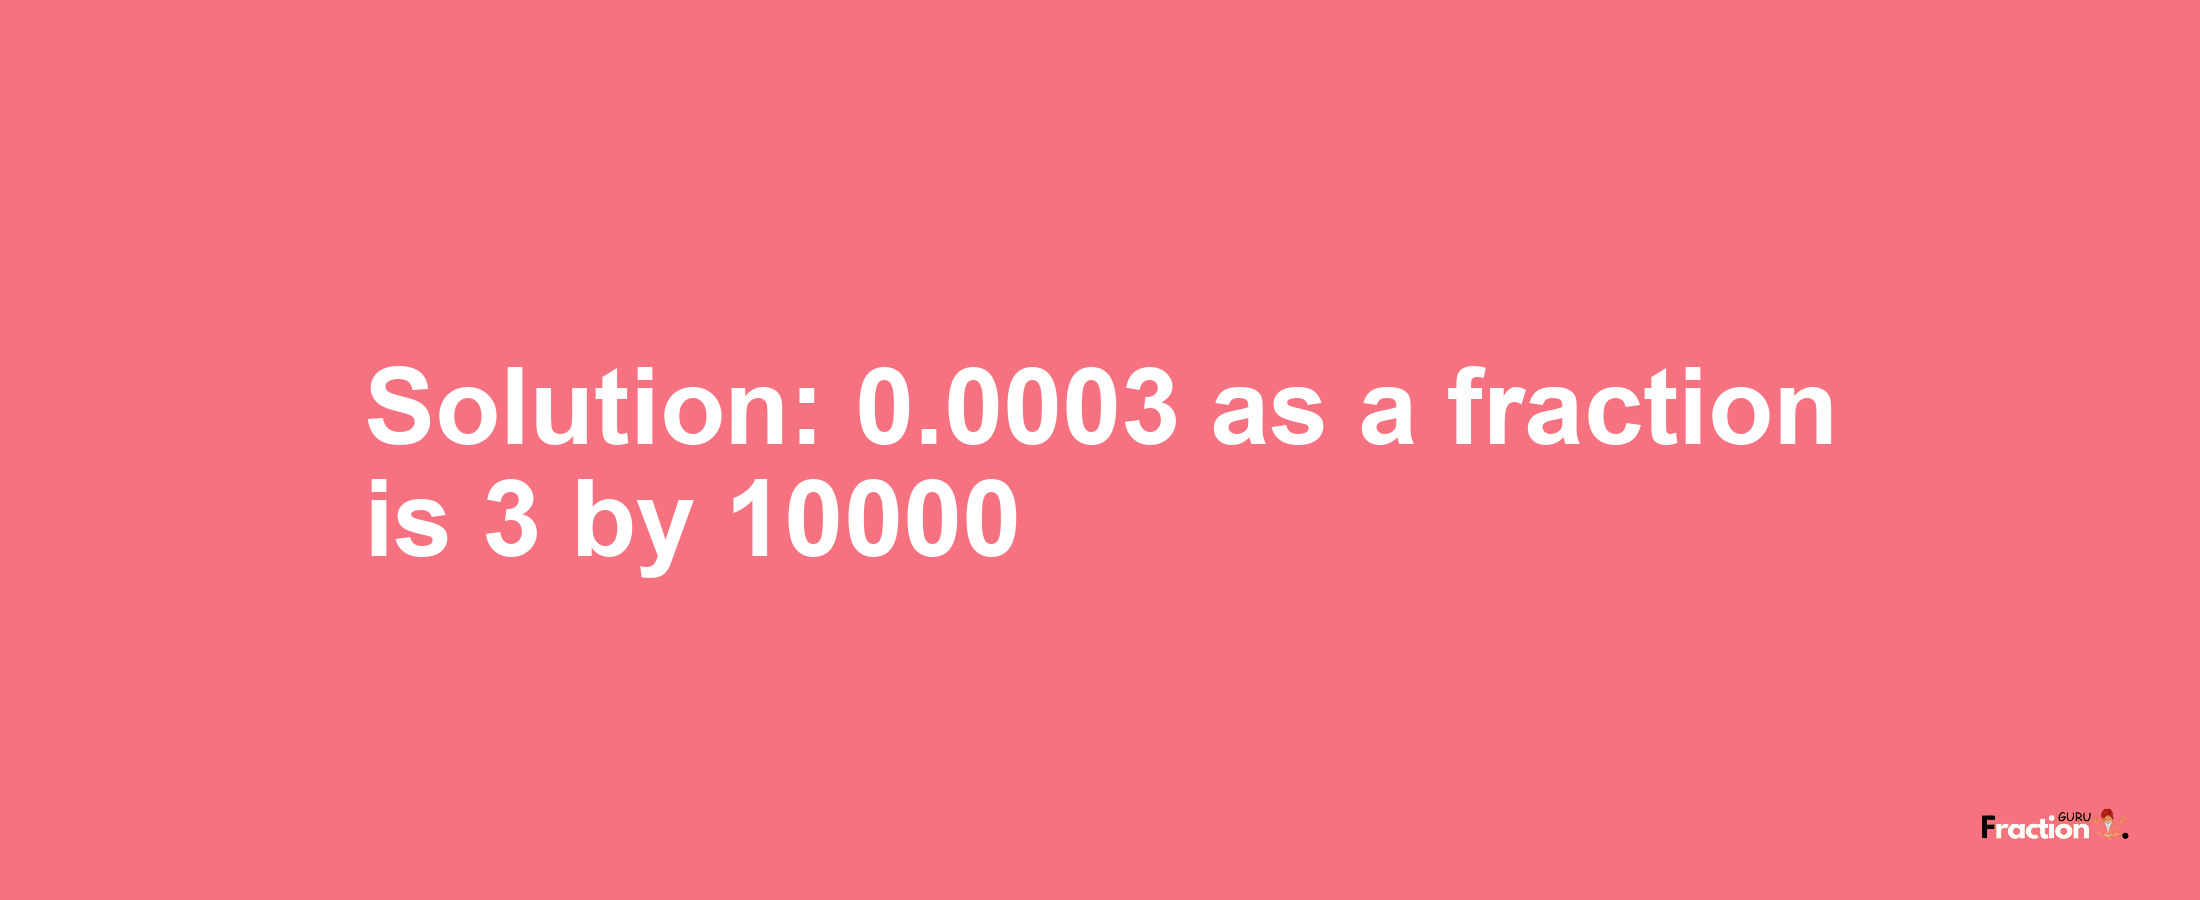 Solution:0.0003 as a fraction is 3/10000